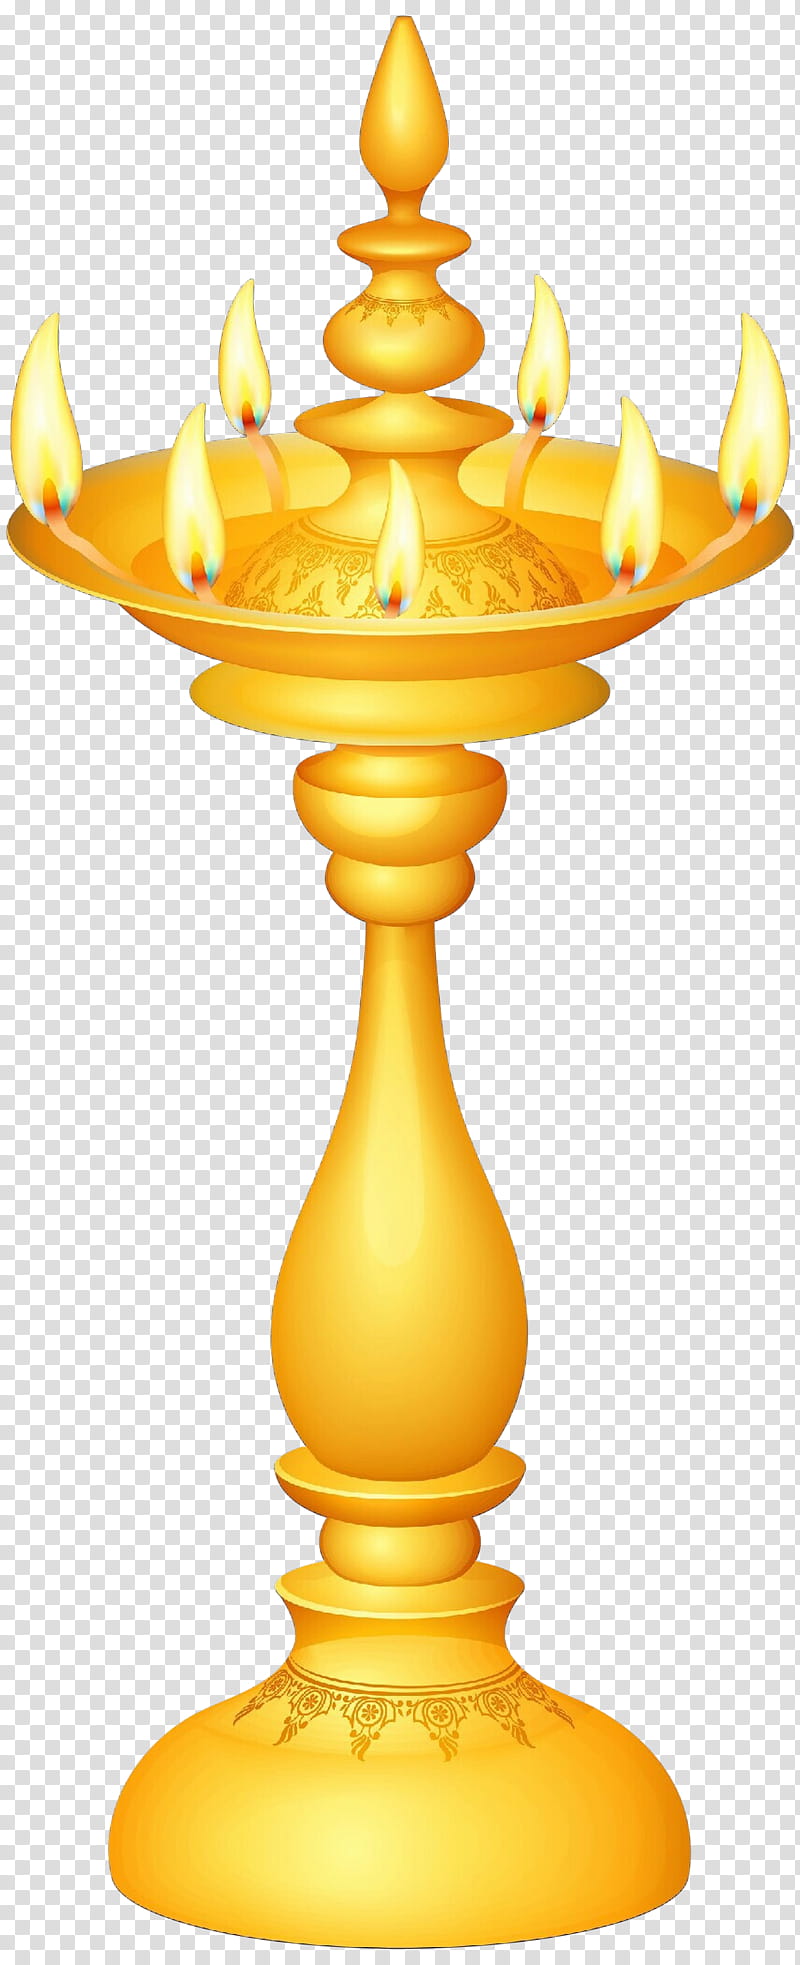 yellow candle holder oil lamp light fixture, Cartoon, Tableware transparent background PNG clipart